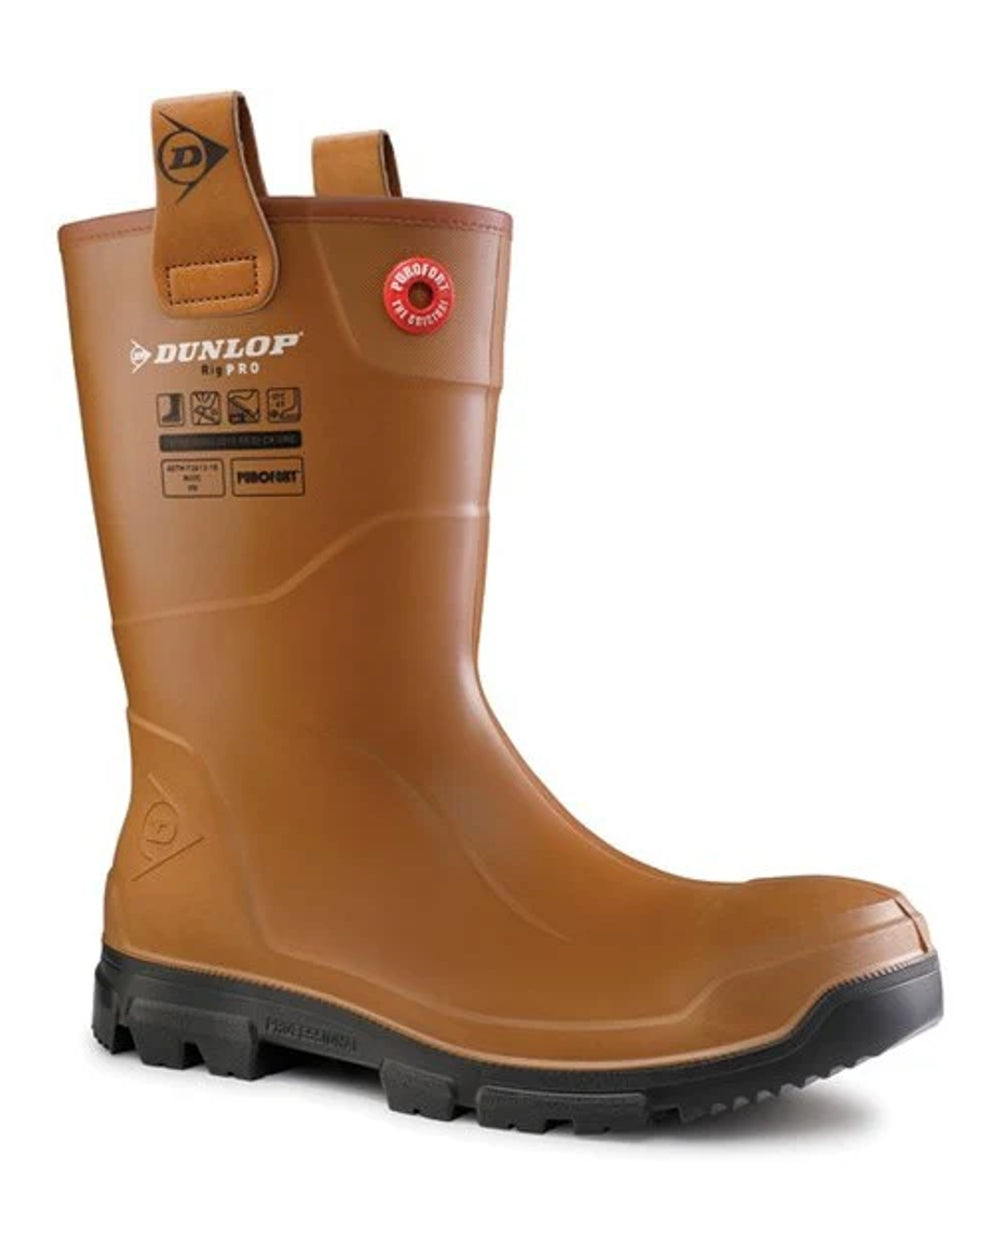 Brown/Black coloured Dunlop Purofort RigPRO Full Safety Fur Lining Wellingtons on white background 